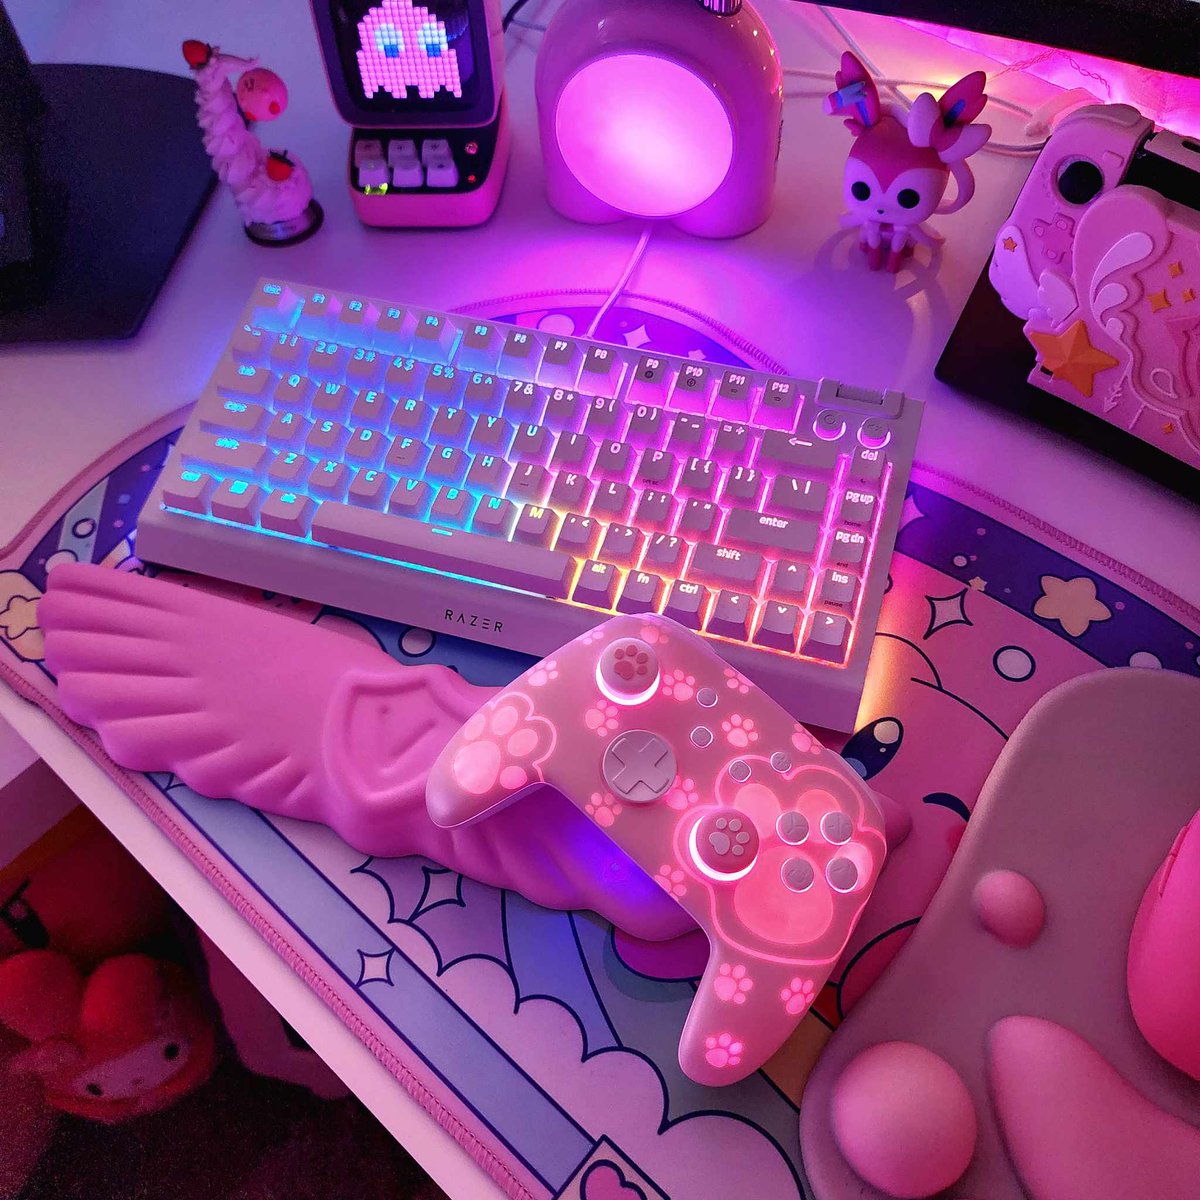 Ready for my game night! And you?

📷TK: @espidelights

#funlab #Pink #kawaiigirl #GAME #gamergirls